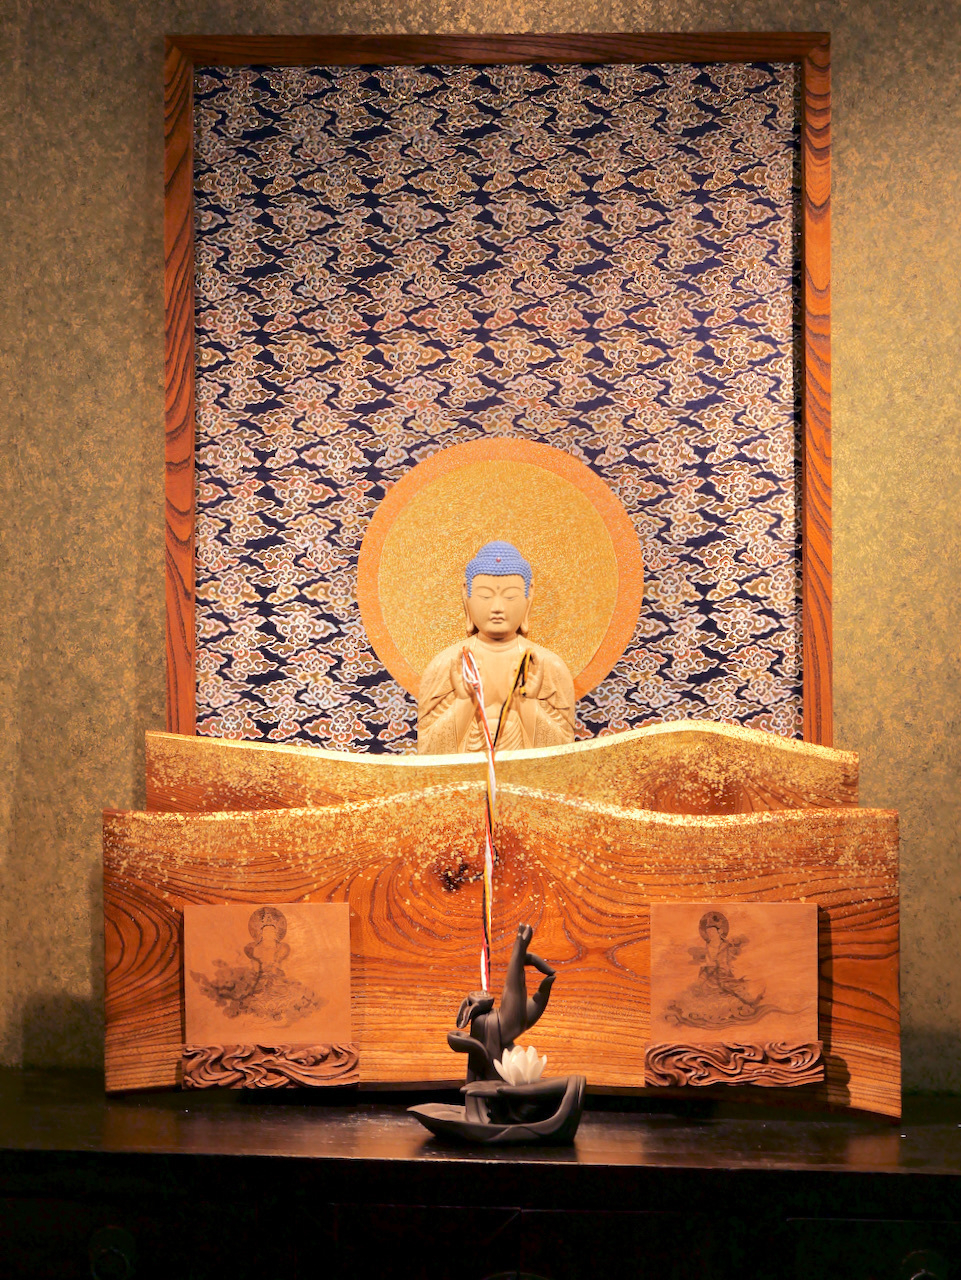 a wooden Amida relief against a cloud pattern cloth. The Amida is holding two strings that hang down over a third part of the artwork showing Kannon and Seishi-bosatsu